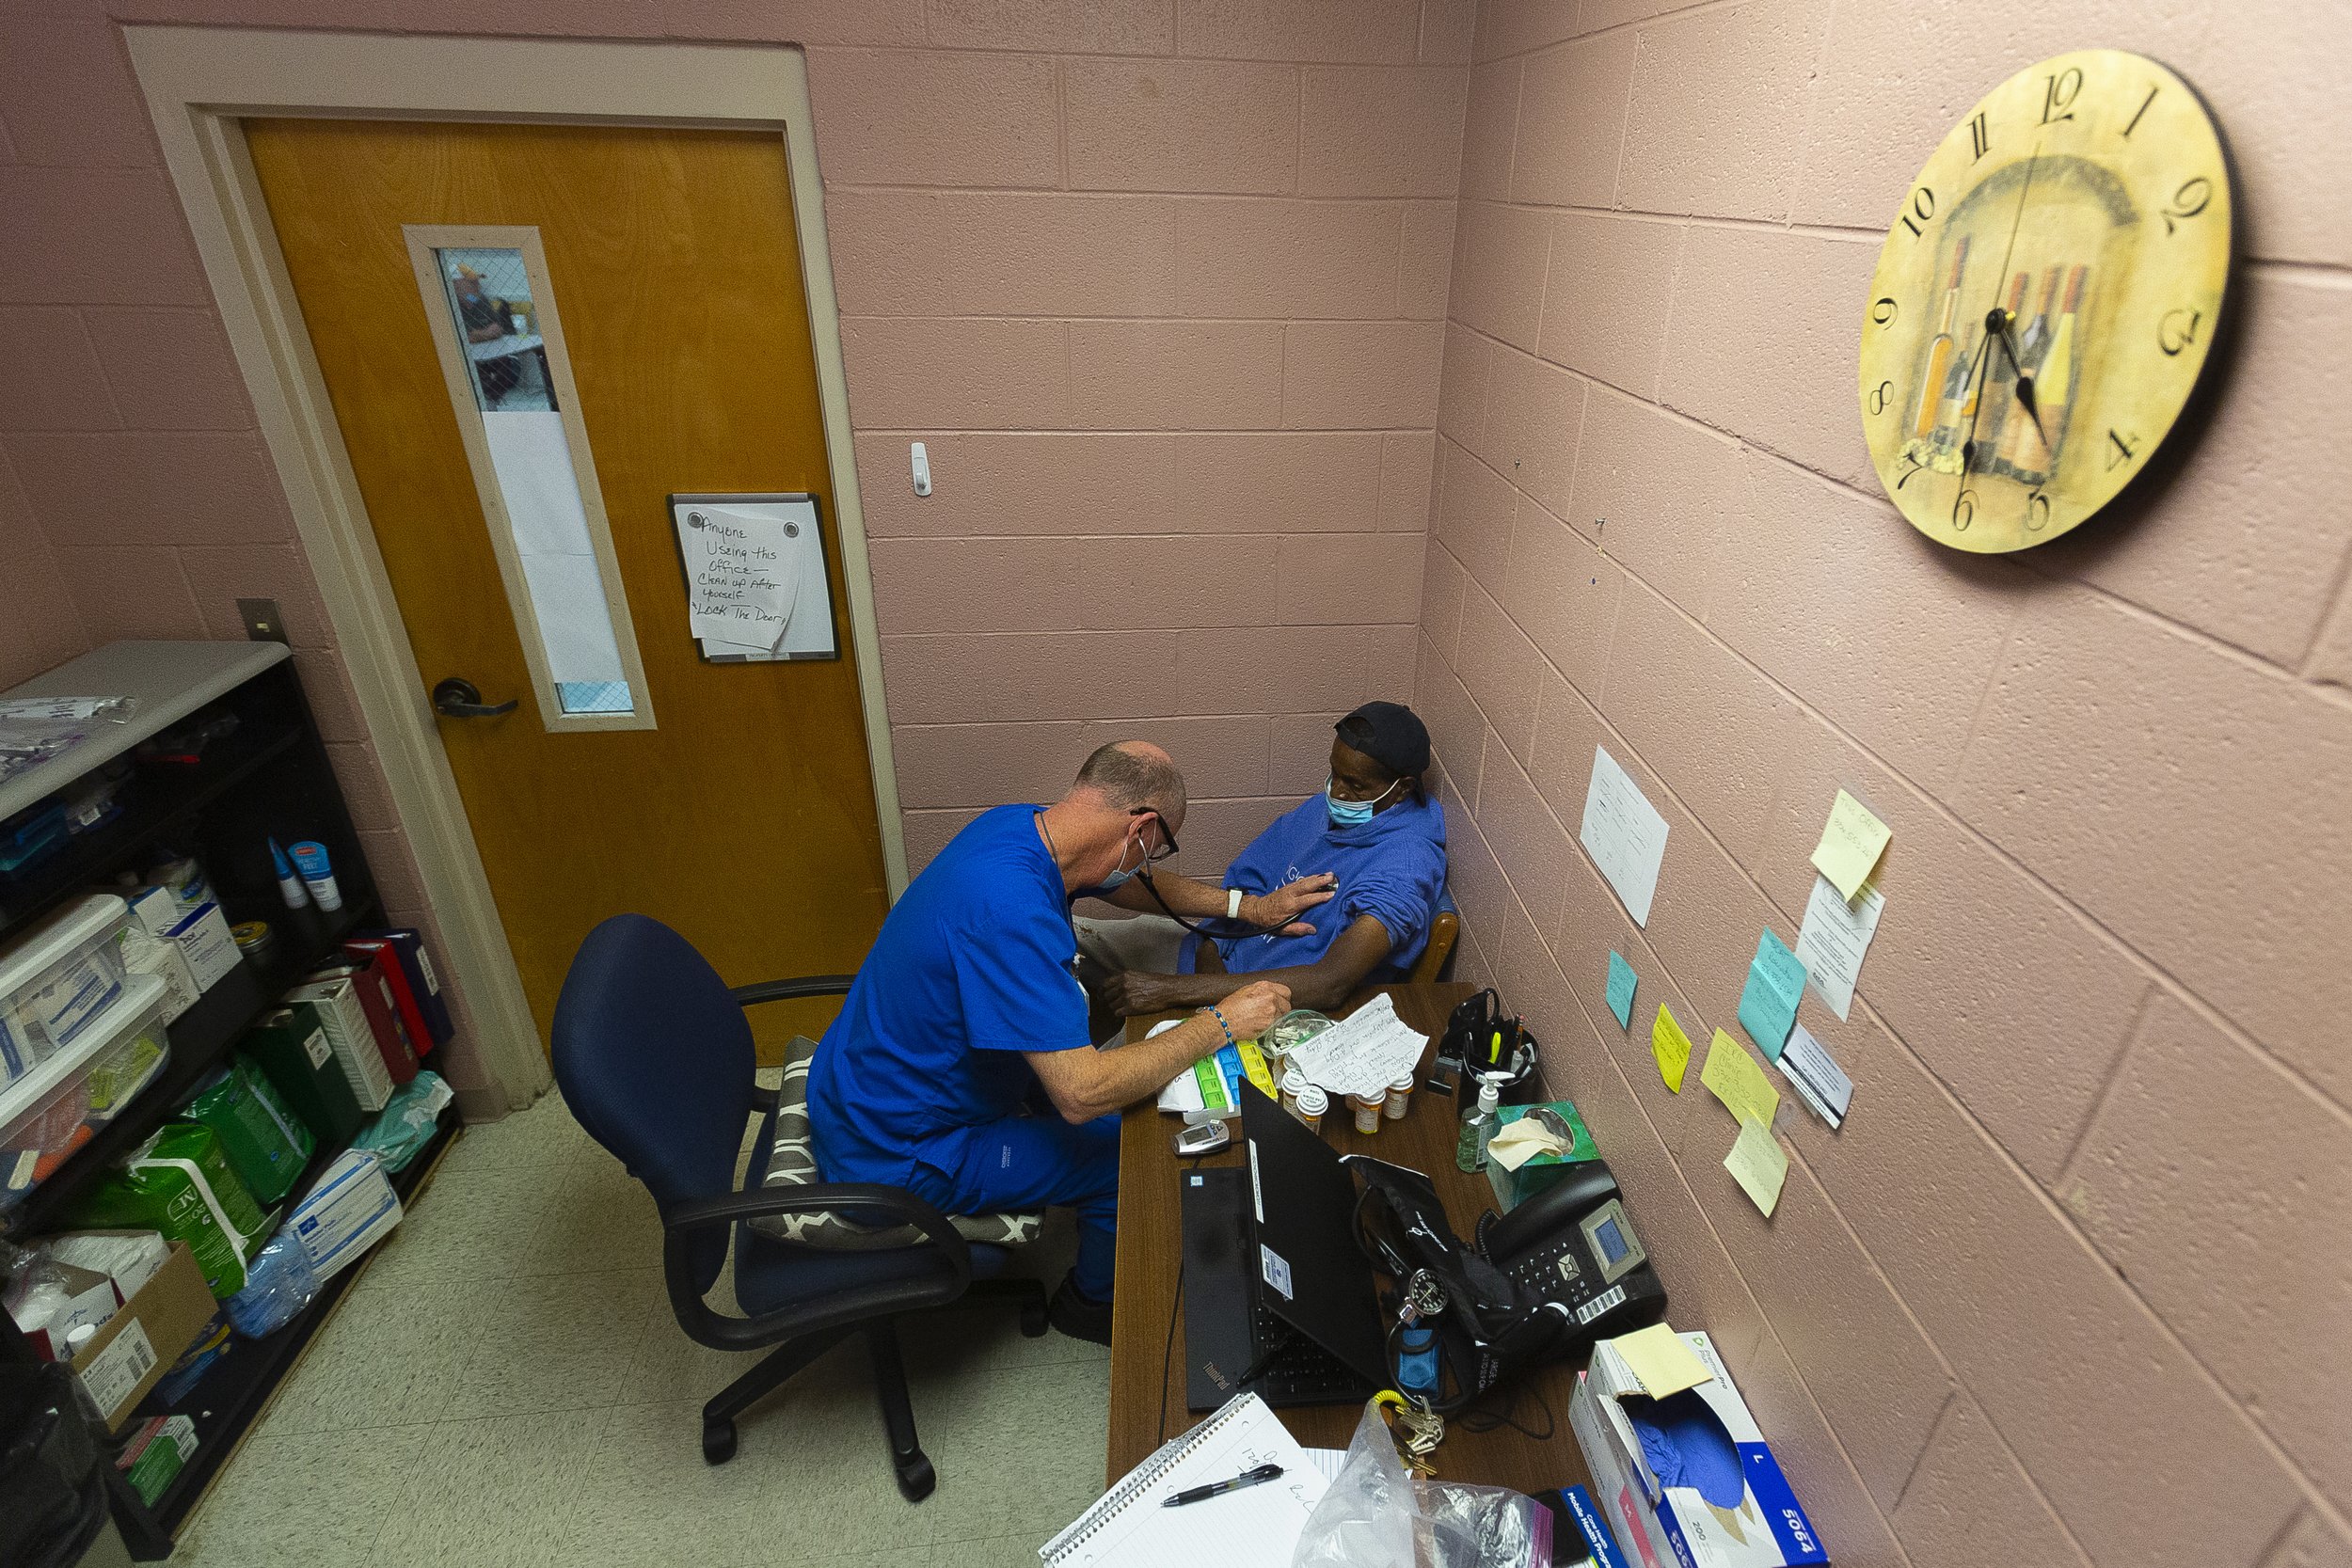  Dr. Patrick Wright uses his stethoscope to listen to David Richardson's heart during a weekly checkup during walk-in clinic at the Greensboro Urban Ministry in Greensboro, N.C., on Wednesday, August 4, 2021. 